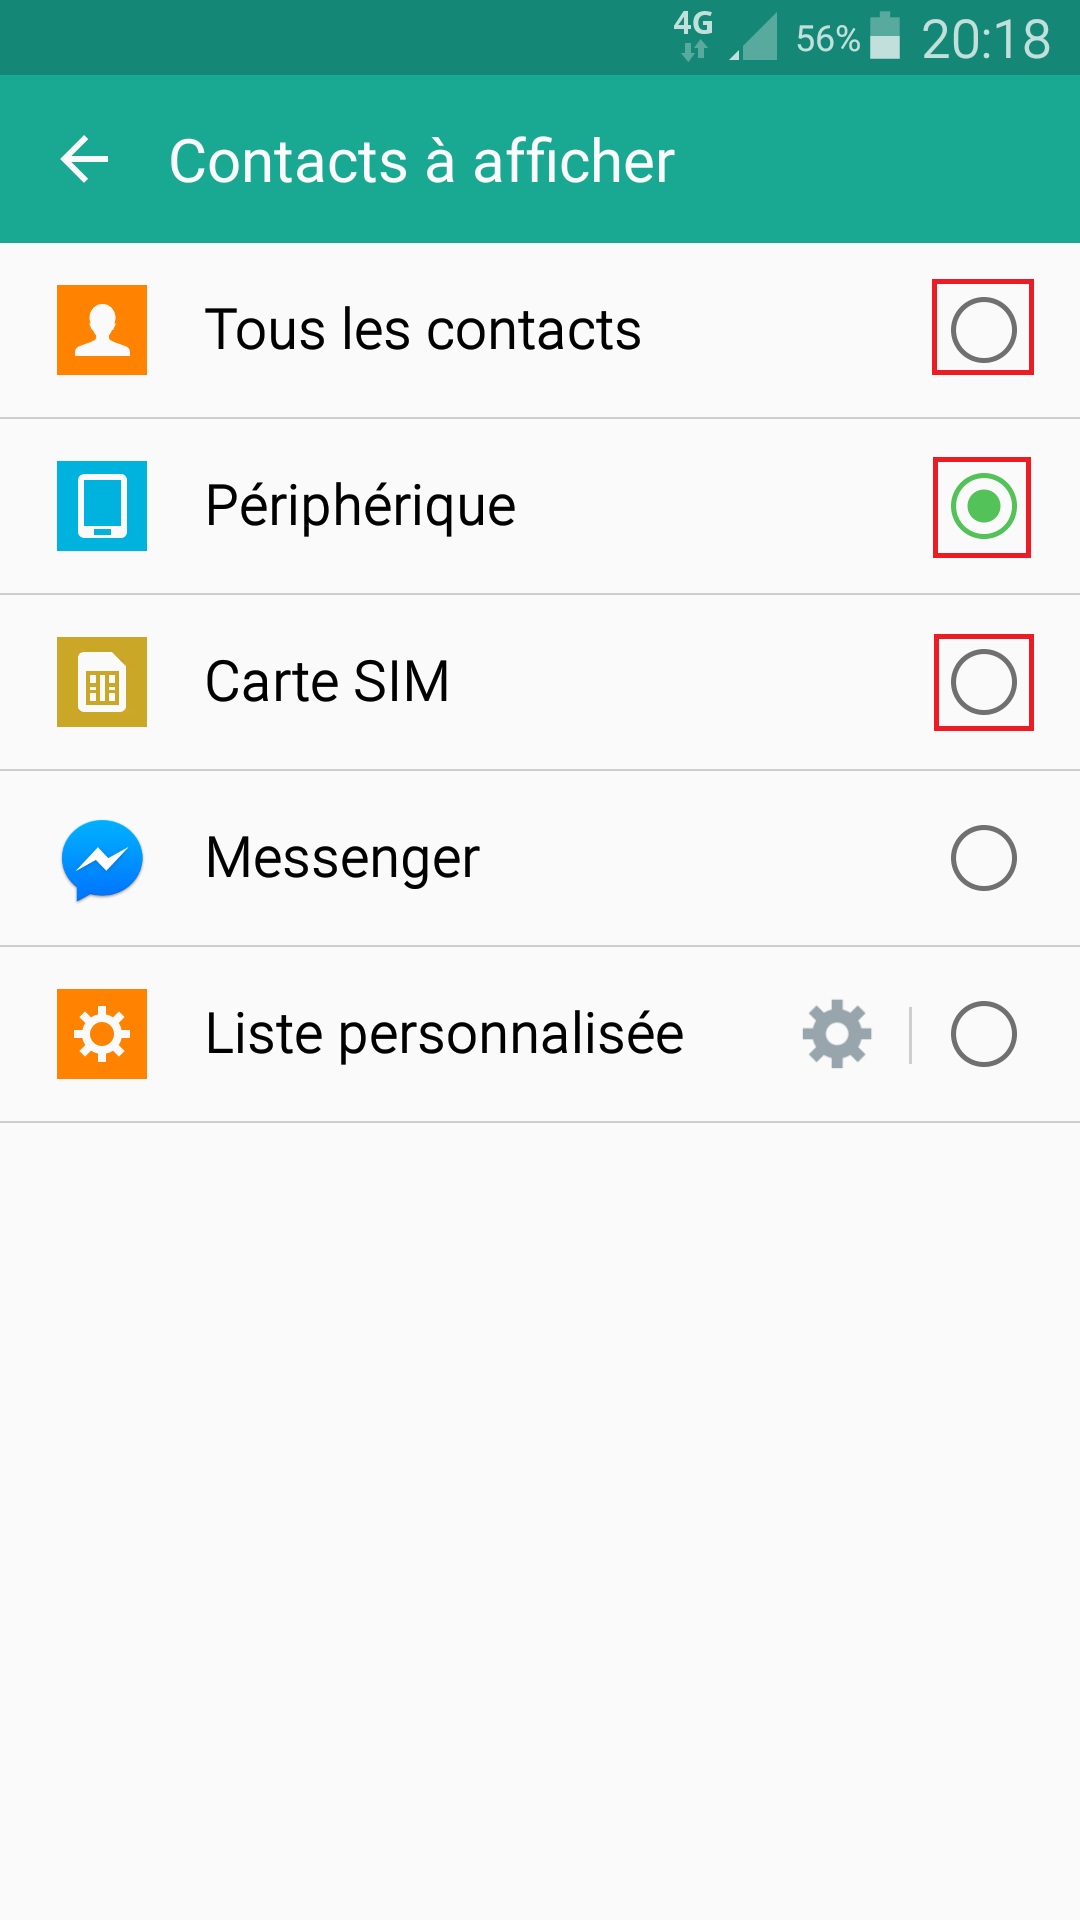 contact code pin ecran verrouillage Samsung android 5 contact afficher 2